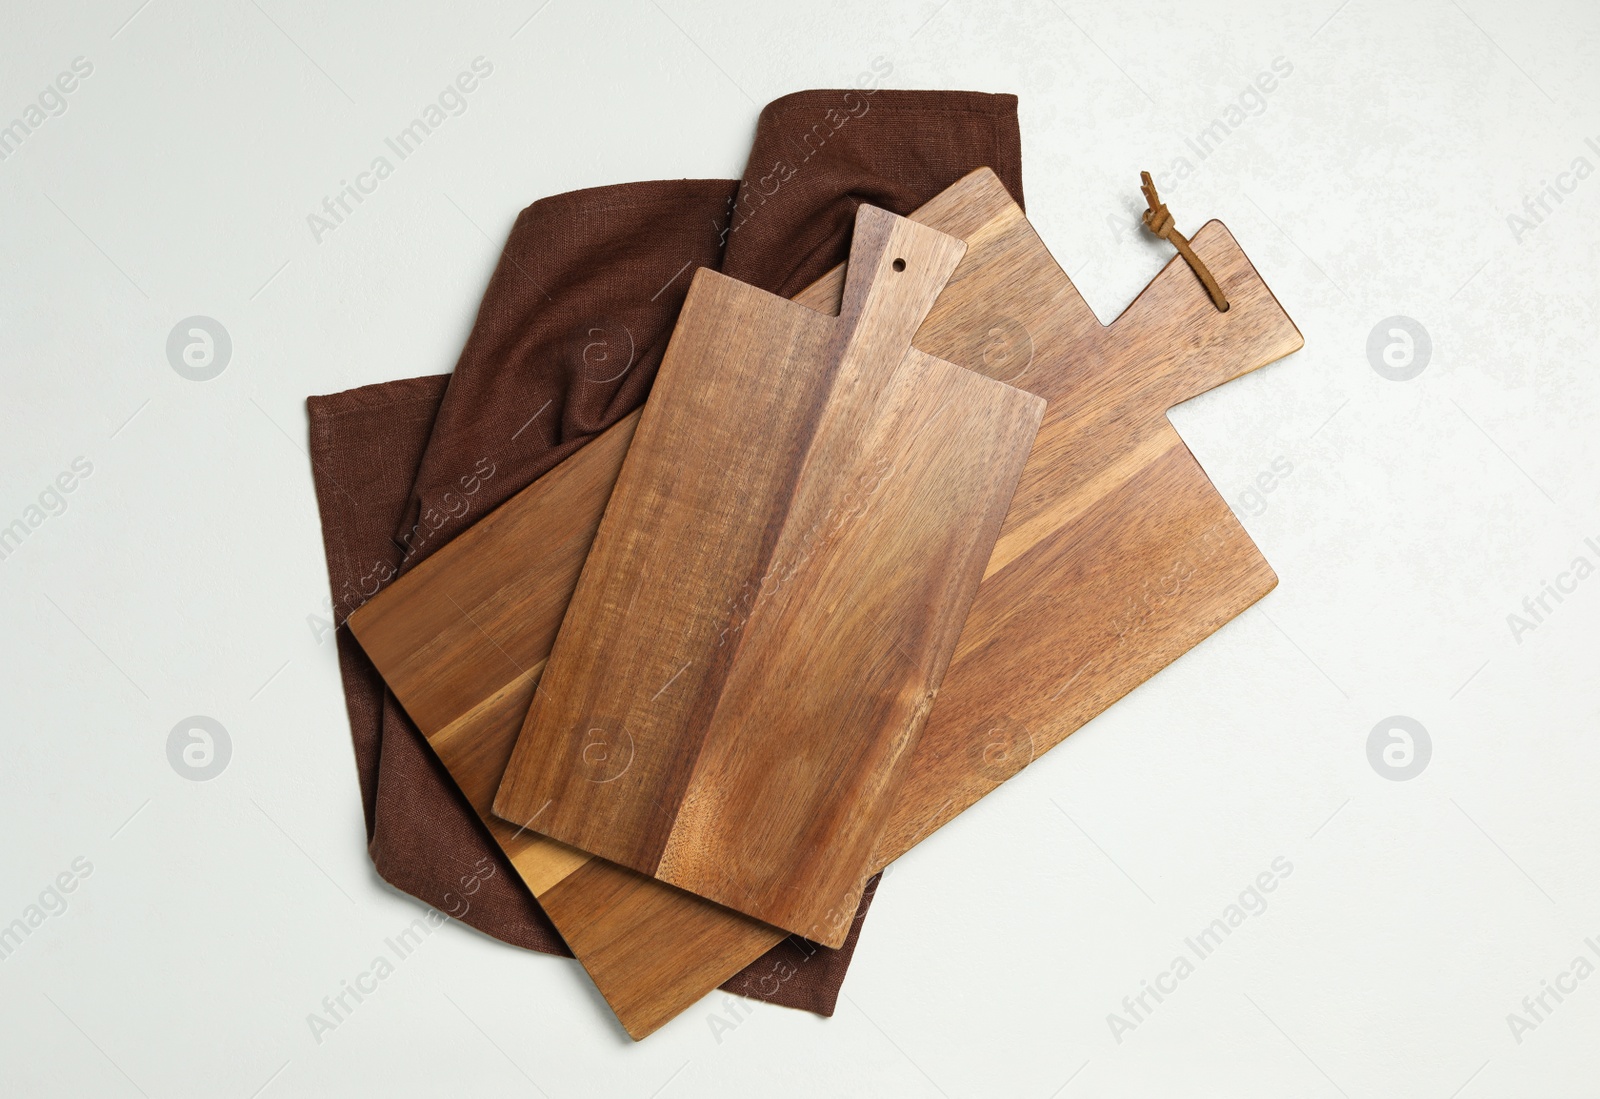 Photo of Wooden boards and napkin on white background, top view. Cooking utensils